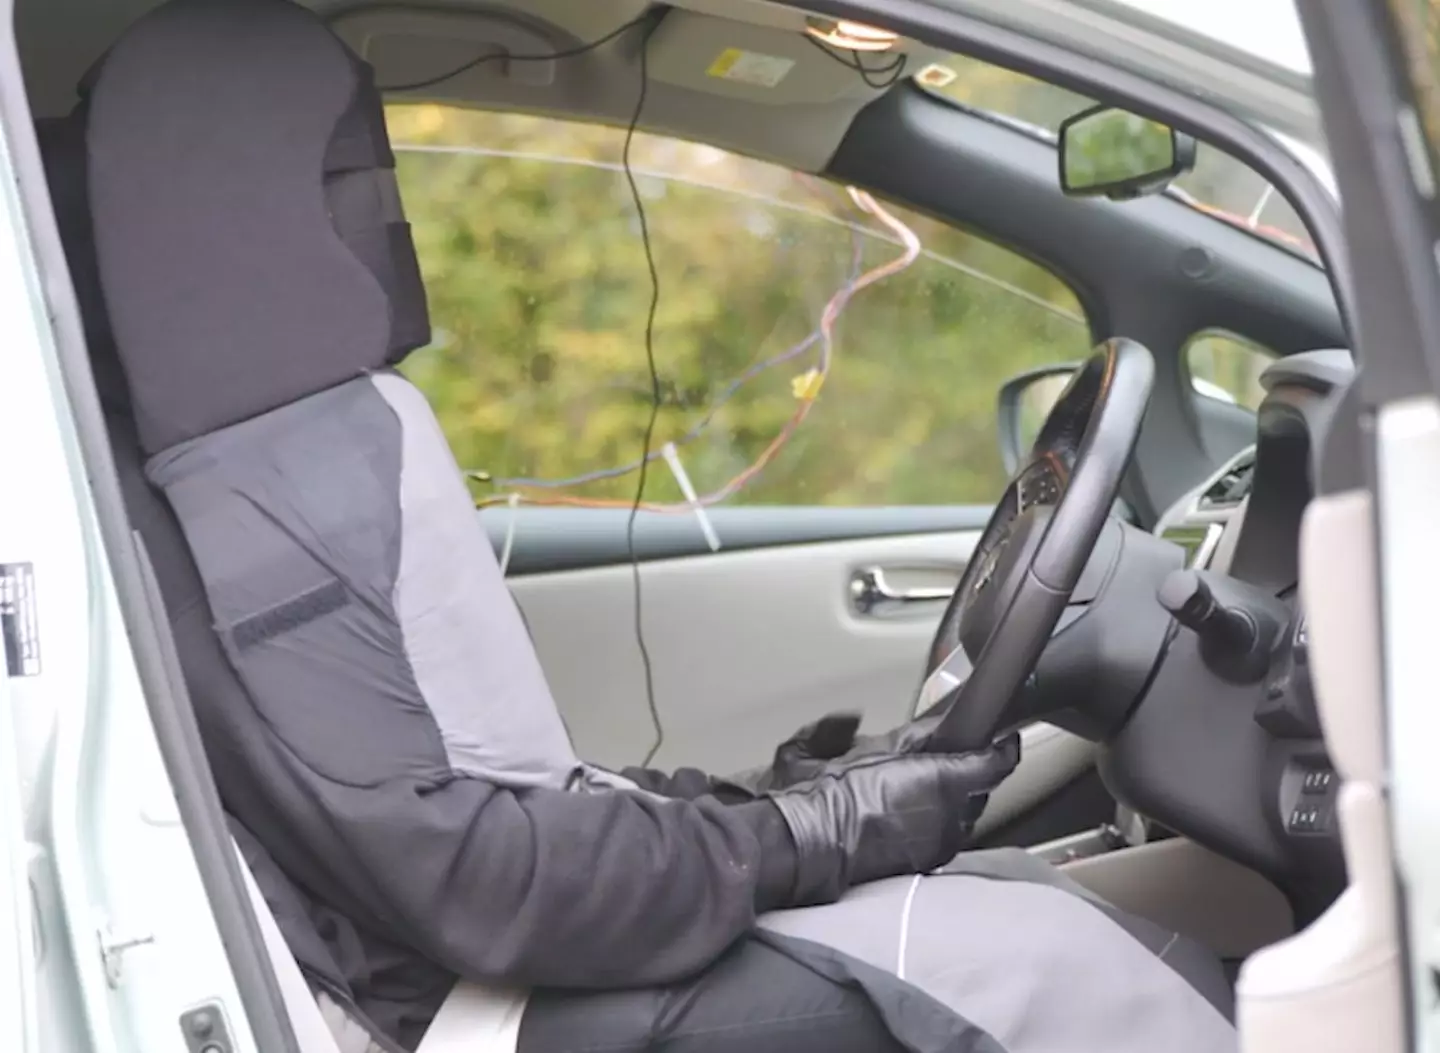 A ‘ghost-driver’ hid inside the seat to make it look as though the car was self-driving.